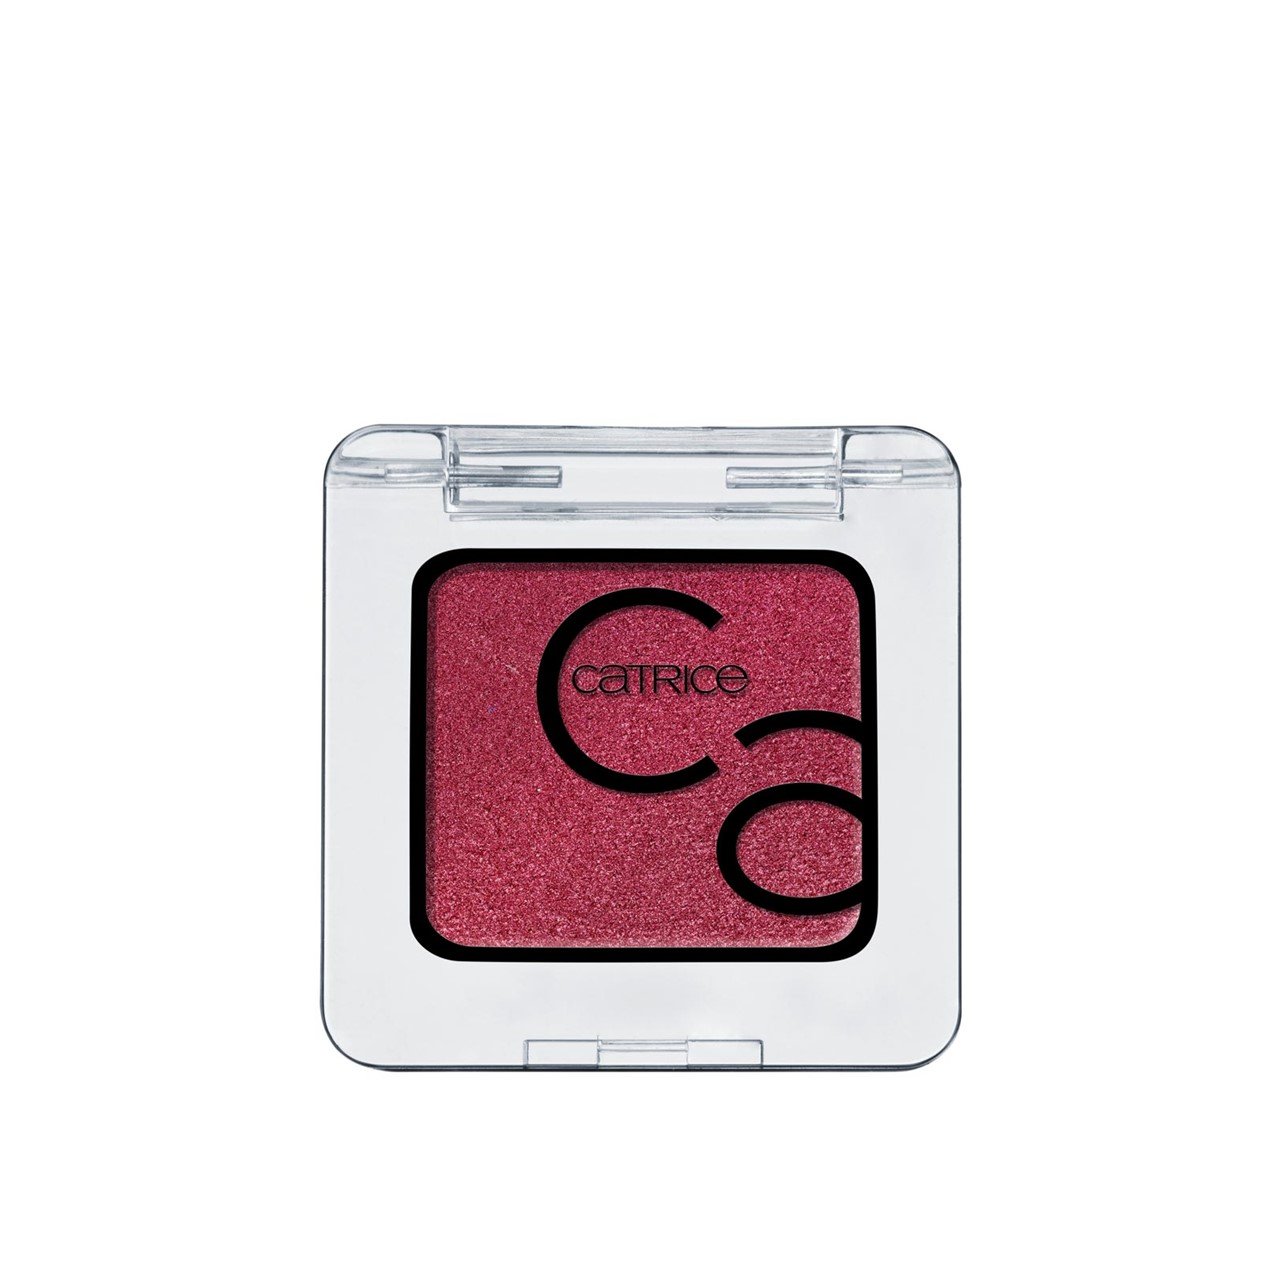 Catrice Art Couleurs Eyeshadow 230 Red Trending 2g (0.07oz)